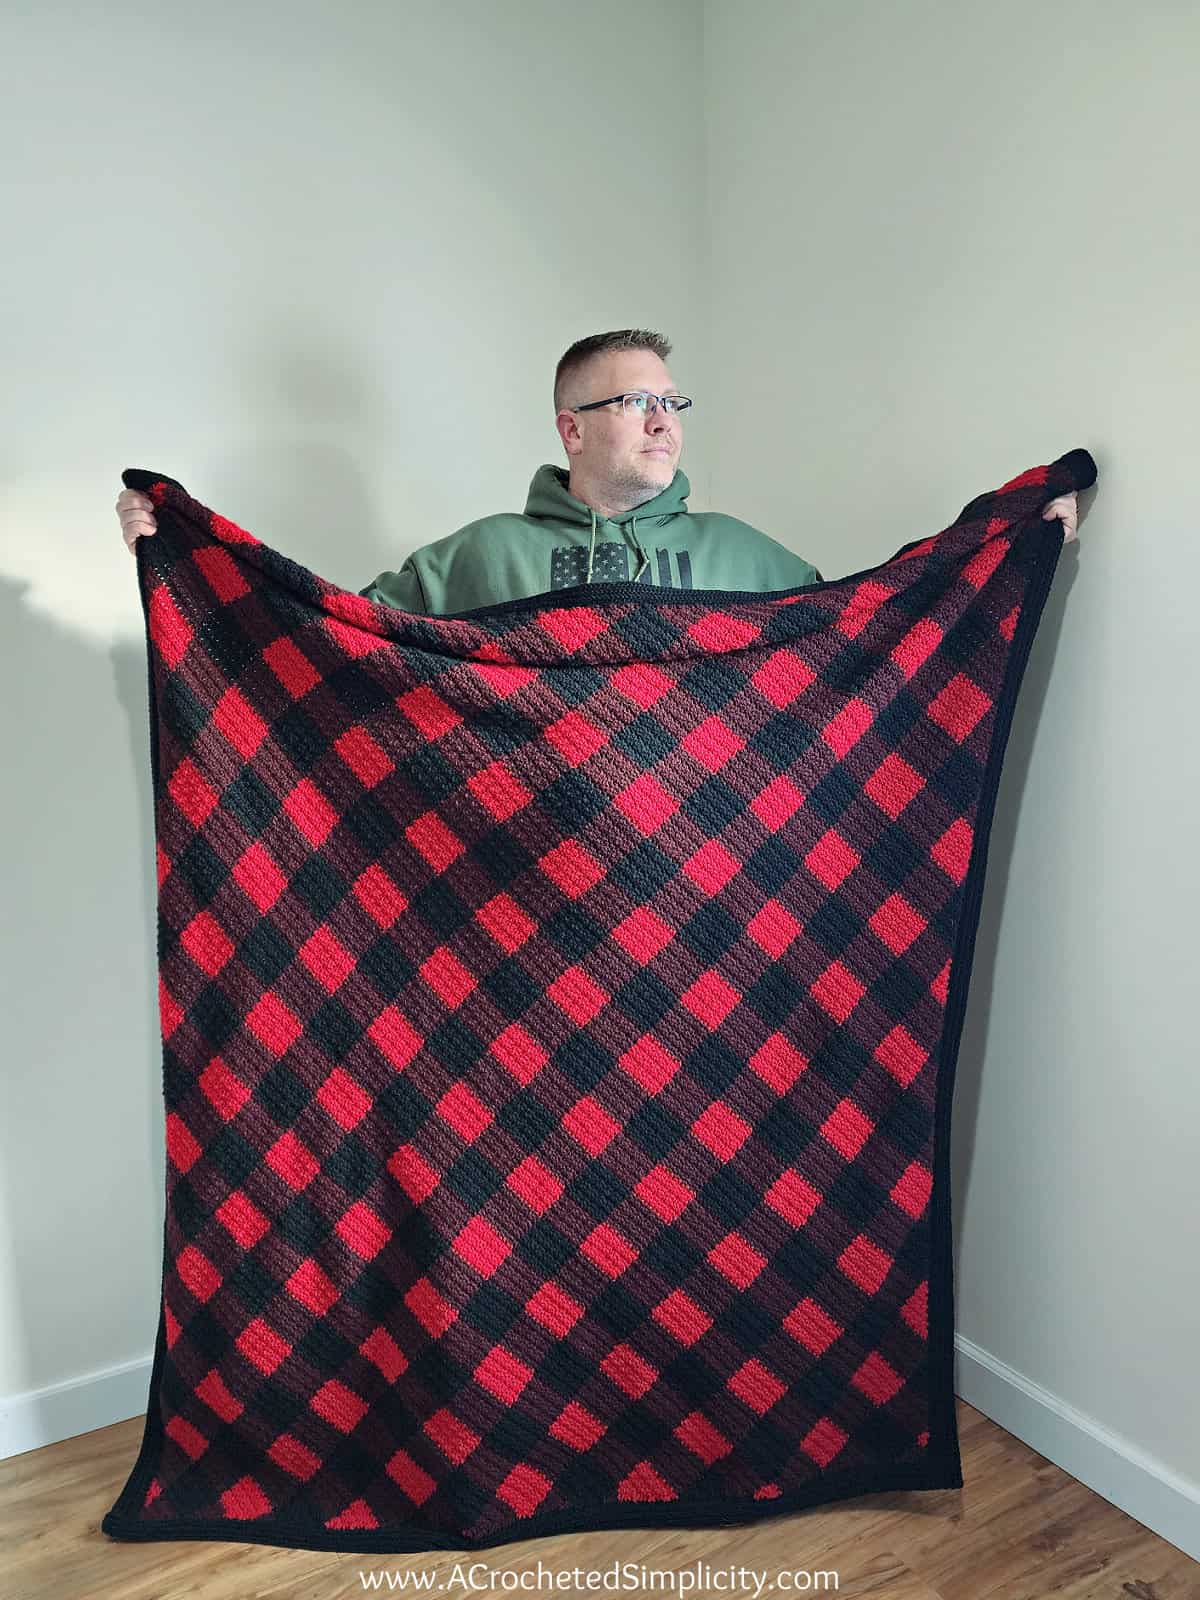 This image shows my husband holding up his new Buffalo Plaid Crochet Blanket.